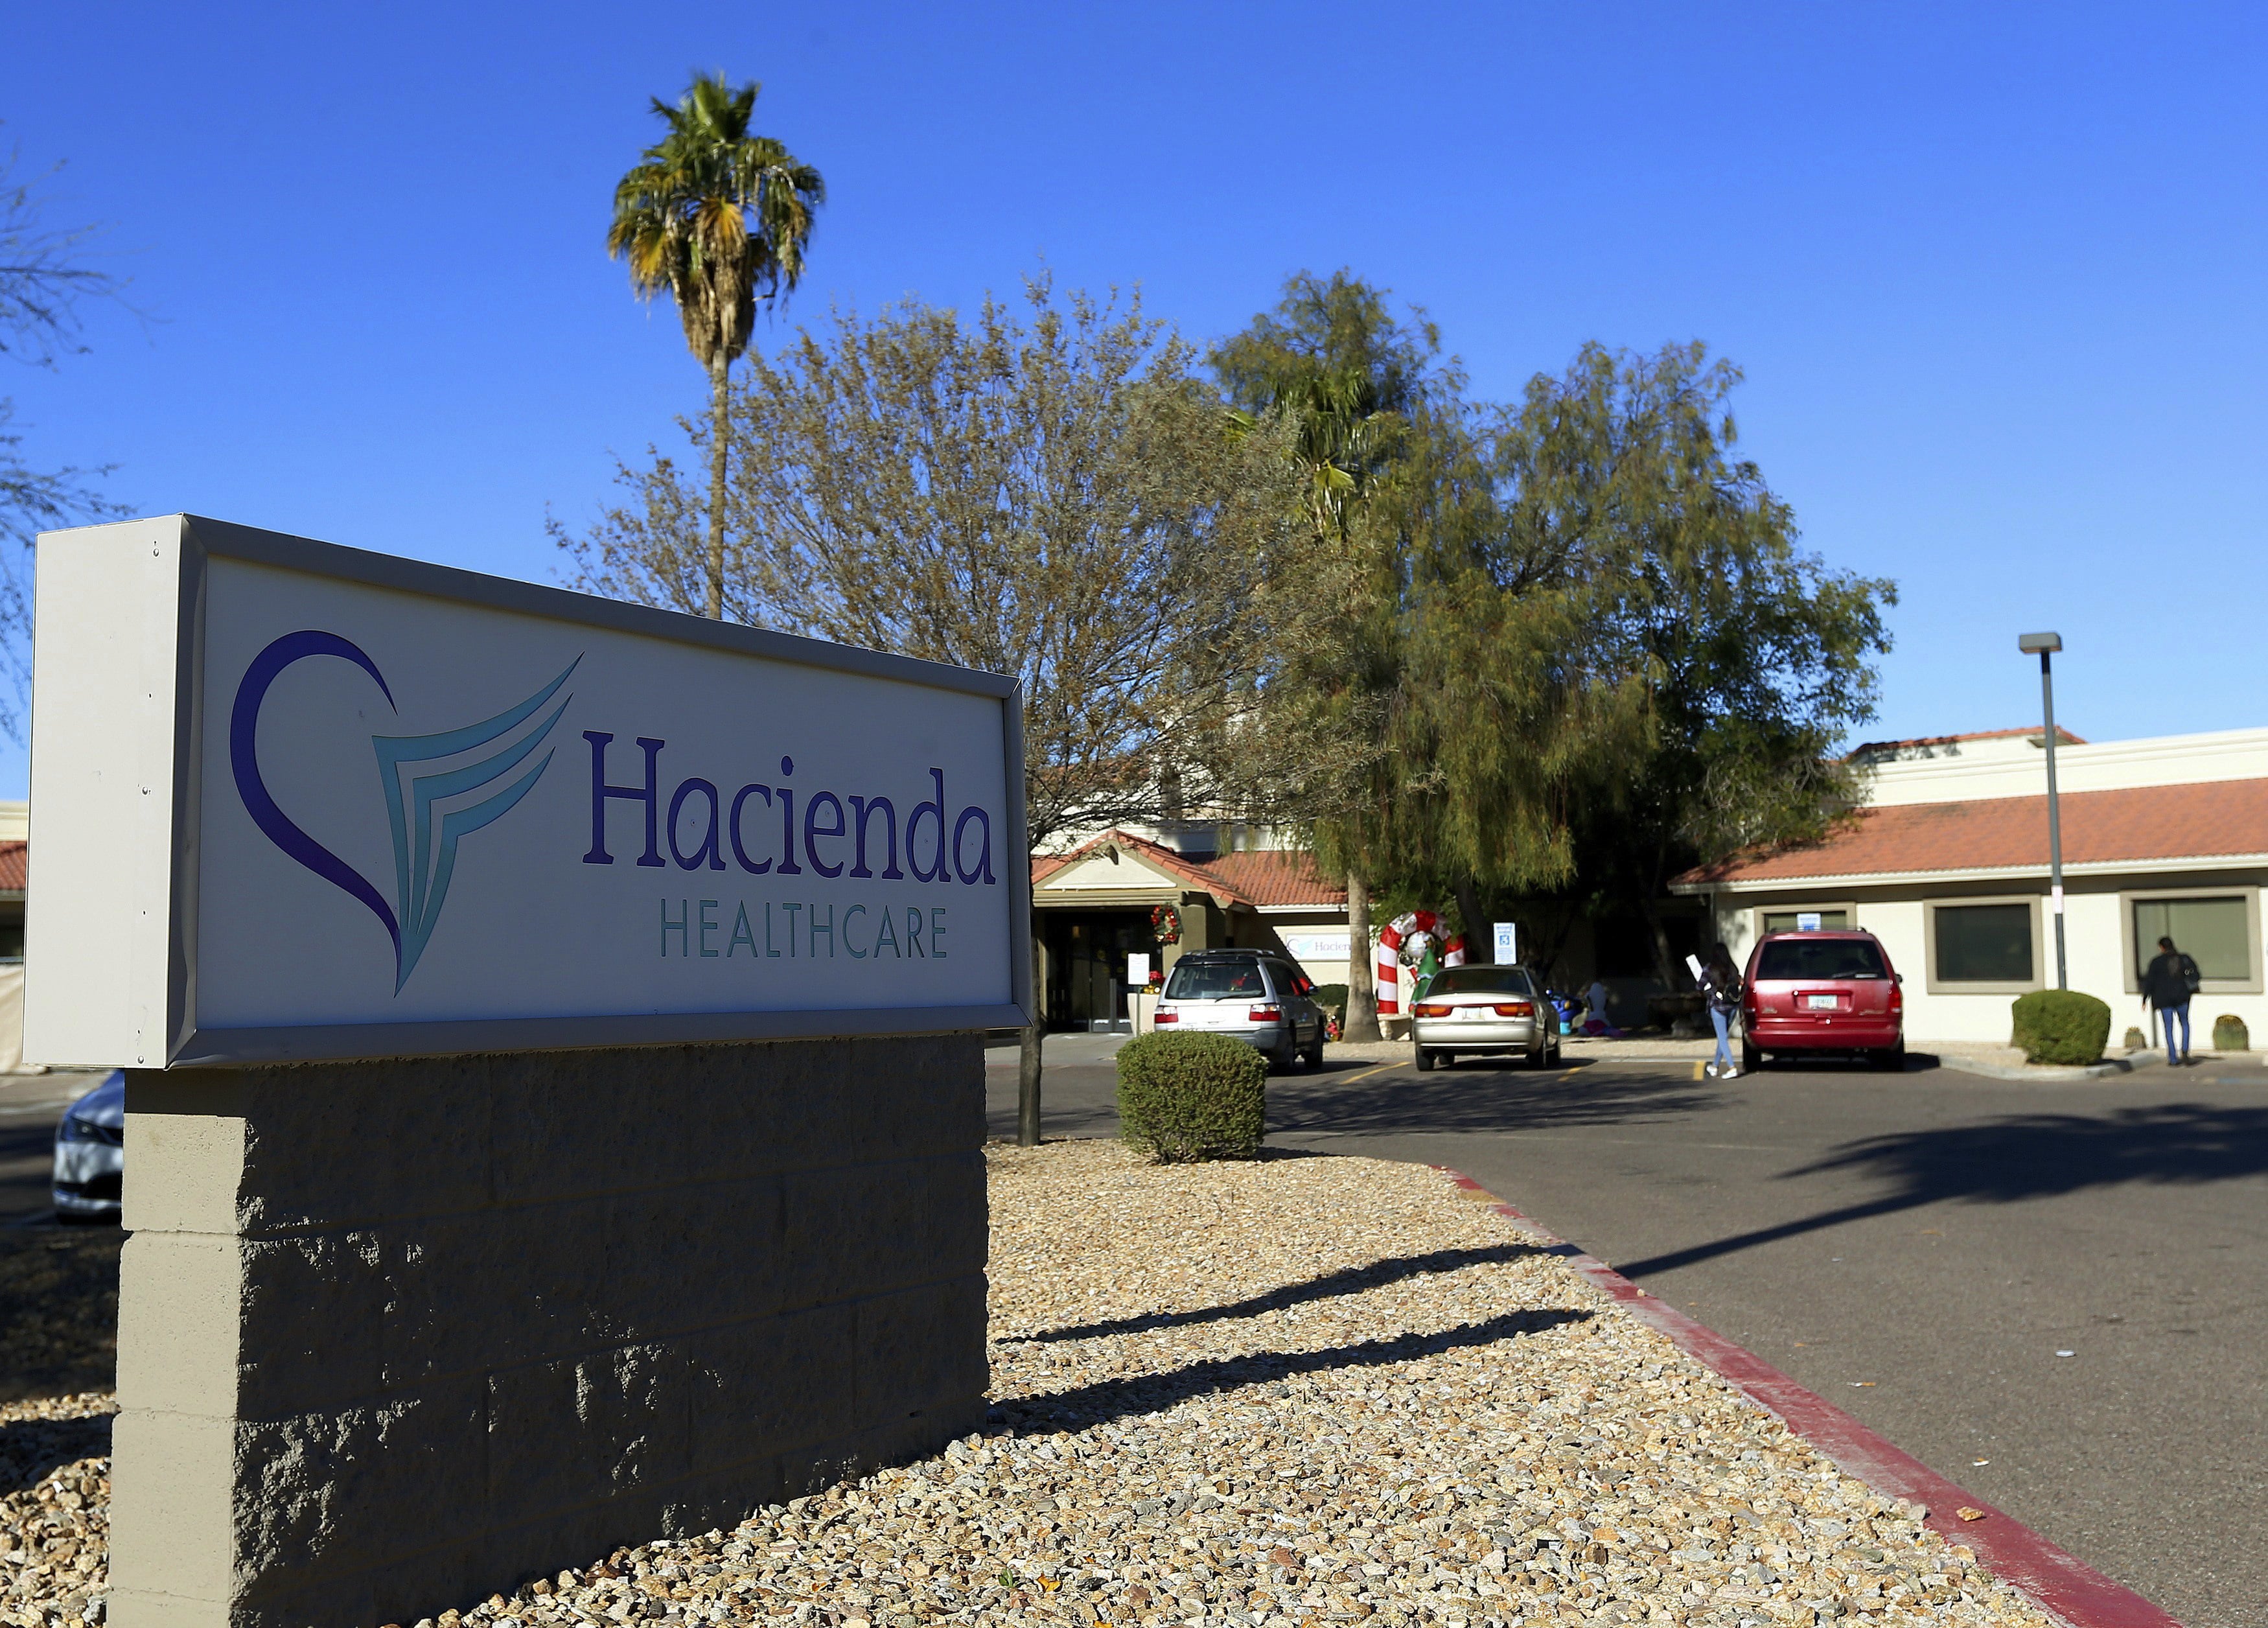 FILE - This Friday, Jan. 4, 2019, file photo shows Hacienda HealthCare in Phoenix. Two doctors who cared for an incapacitated woman who gave birth as a result of a sexual assault are no longer providing medical services at the long-term care center in Phoenix, Hacienda HealthCare said Sunday, Jan. 20. (AP Photo/Ross D.